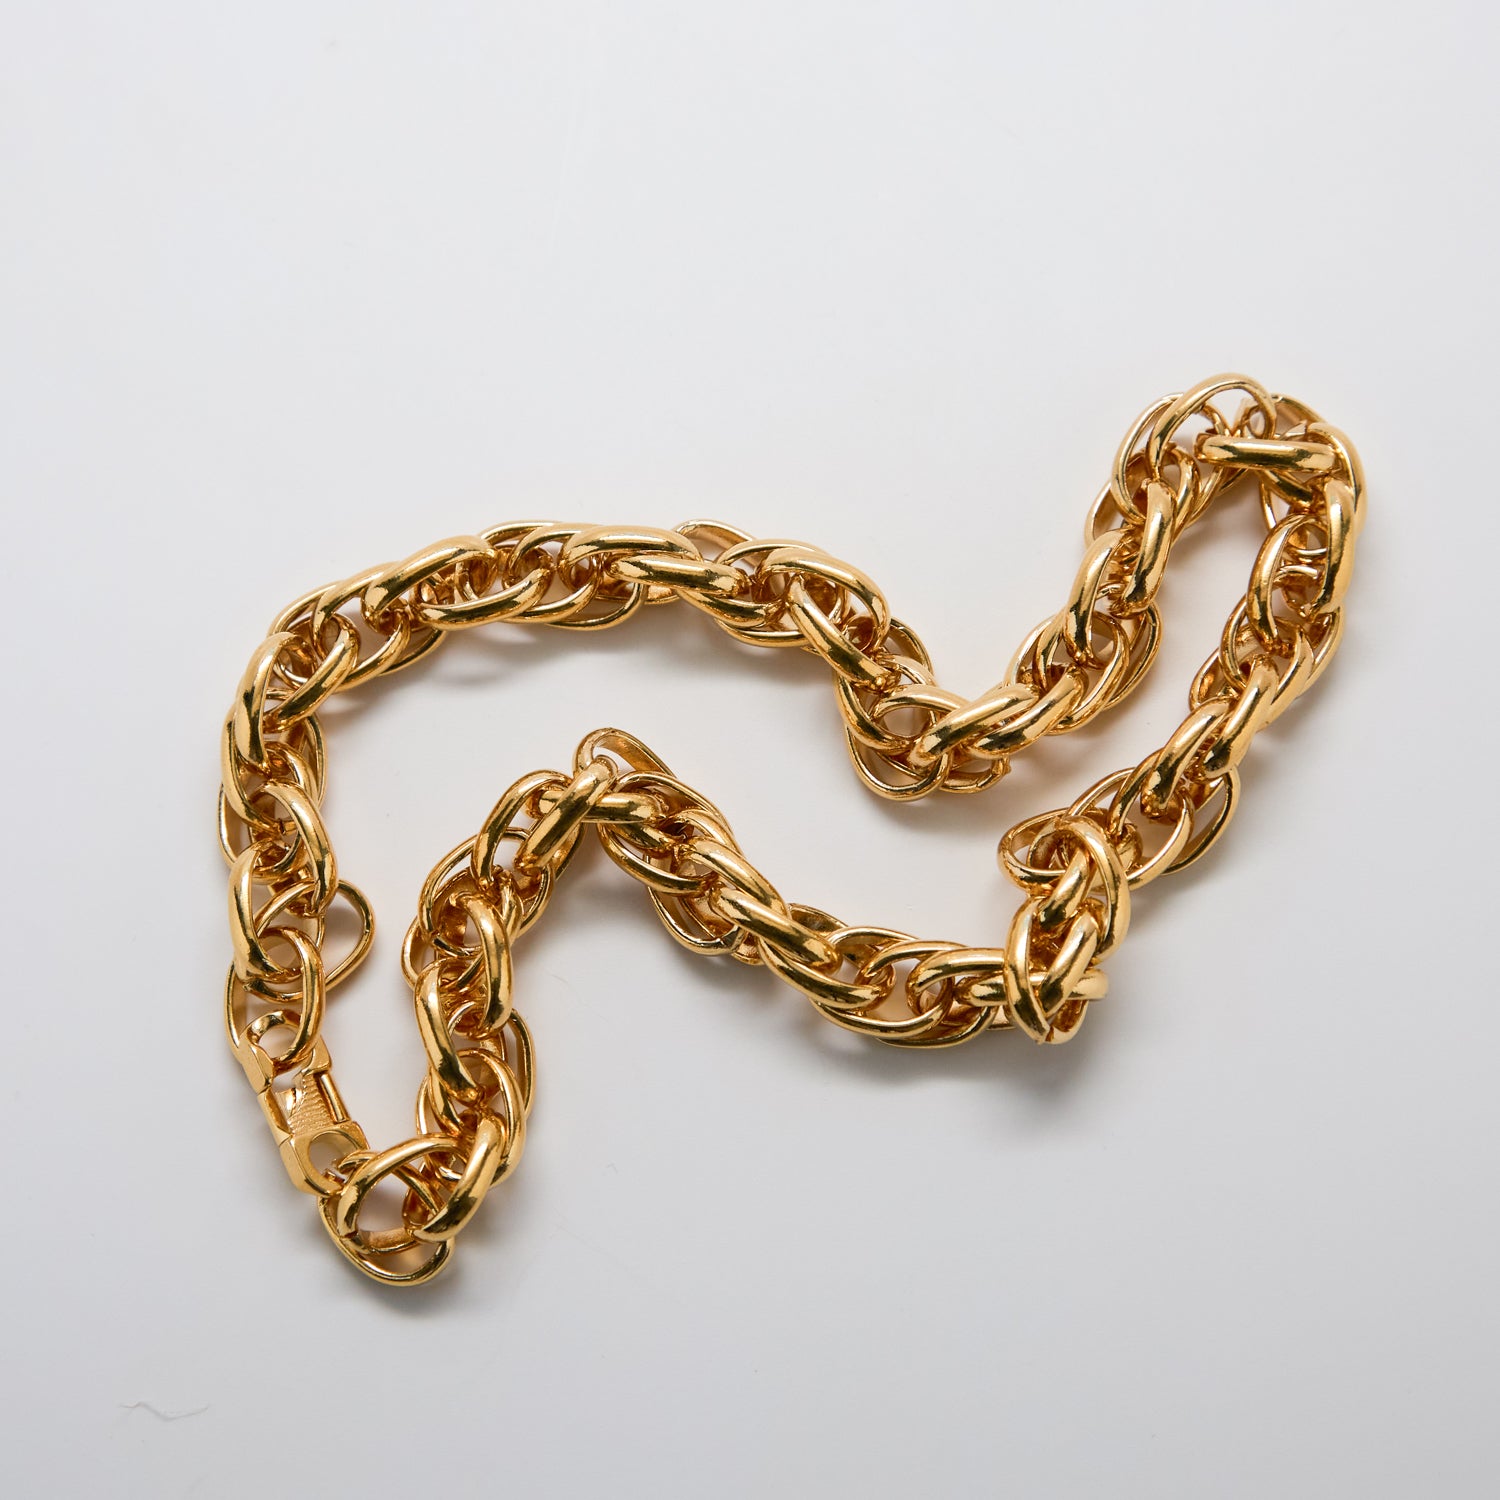 Vintage Rope Chain Statement Necklace